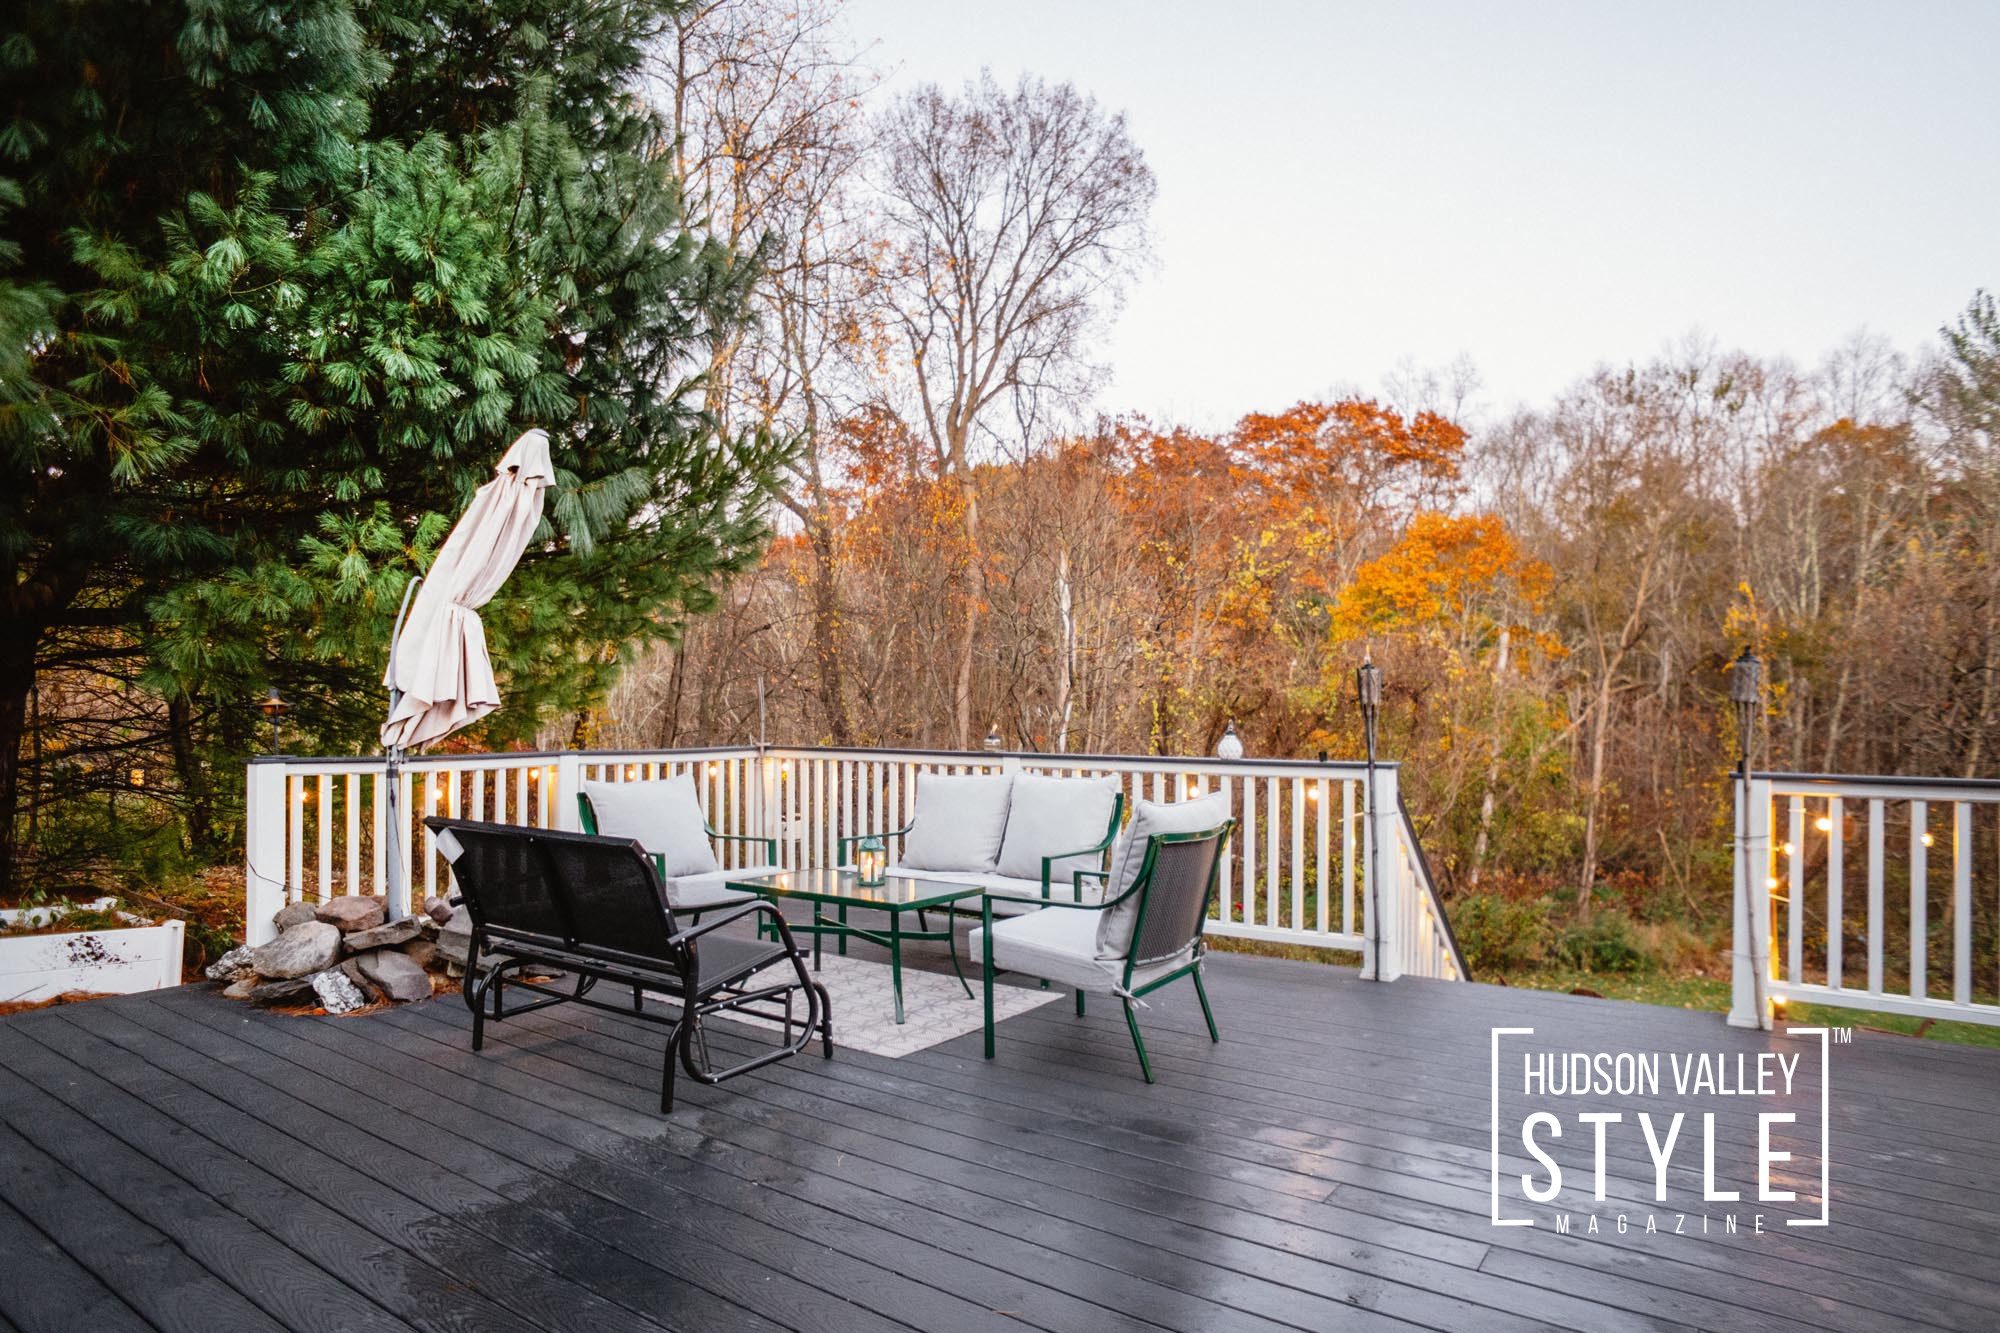 Relax and Rejuvenate in the Catskill Mountains: Experience the Tranquility of a Quiet Country Retreat with a Hot Tub – Presented by Alluvion Vacations – Hudson Valley Airbnb Hot Tub Cabin